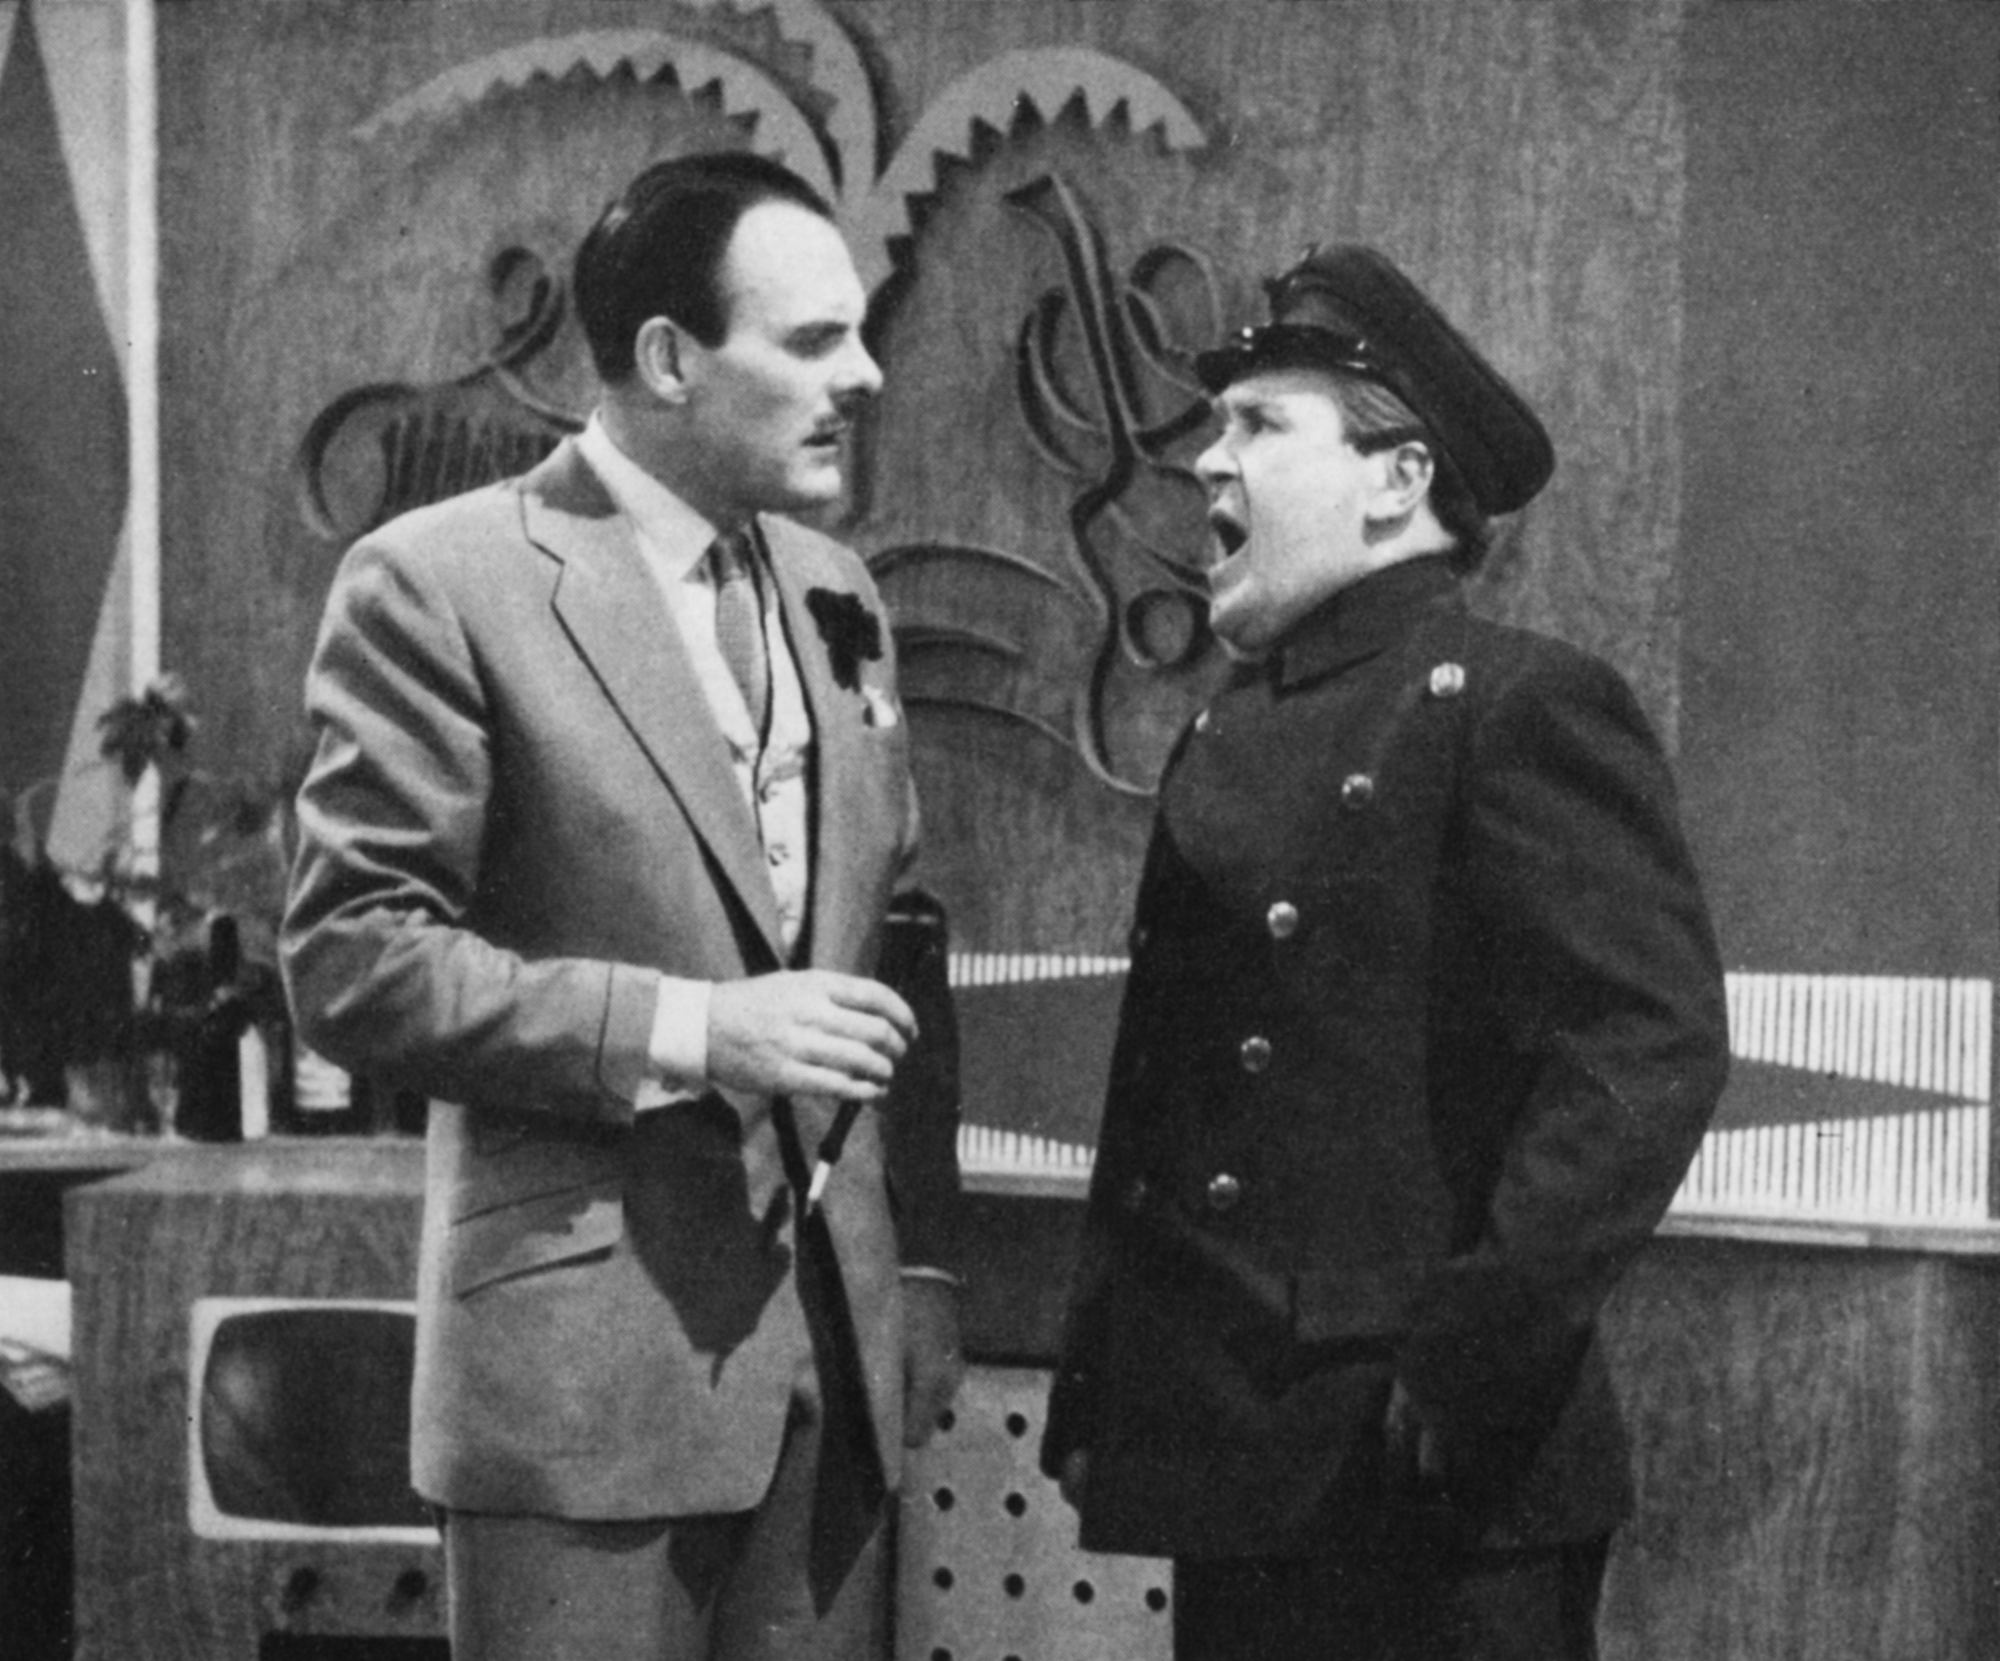 Terry-Thomas talks to his chauffeur, Peter Butterworth